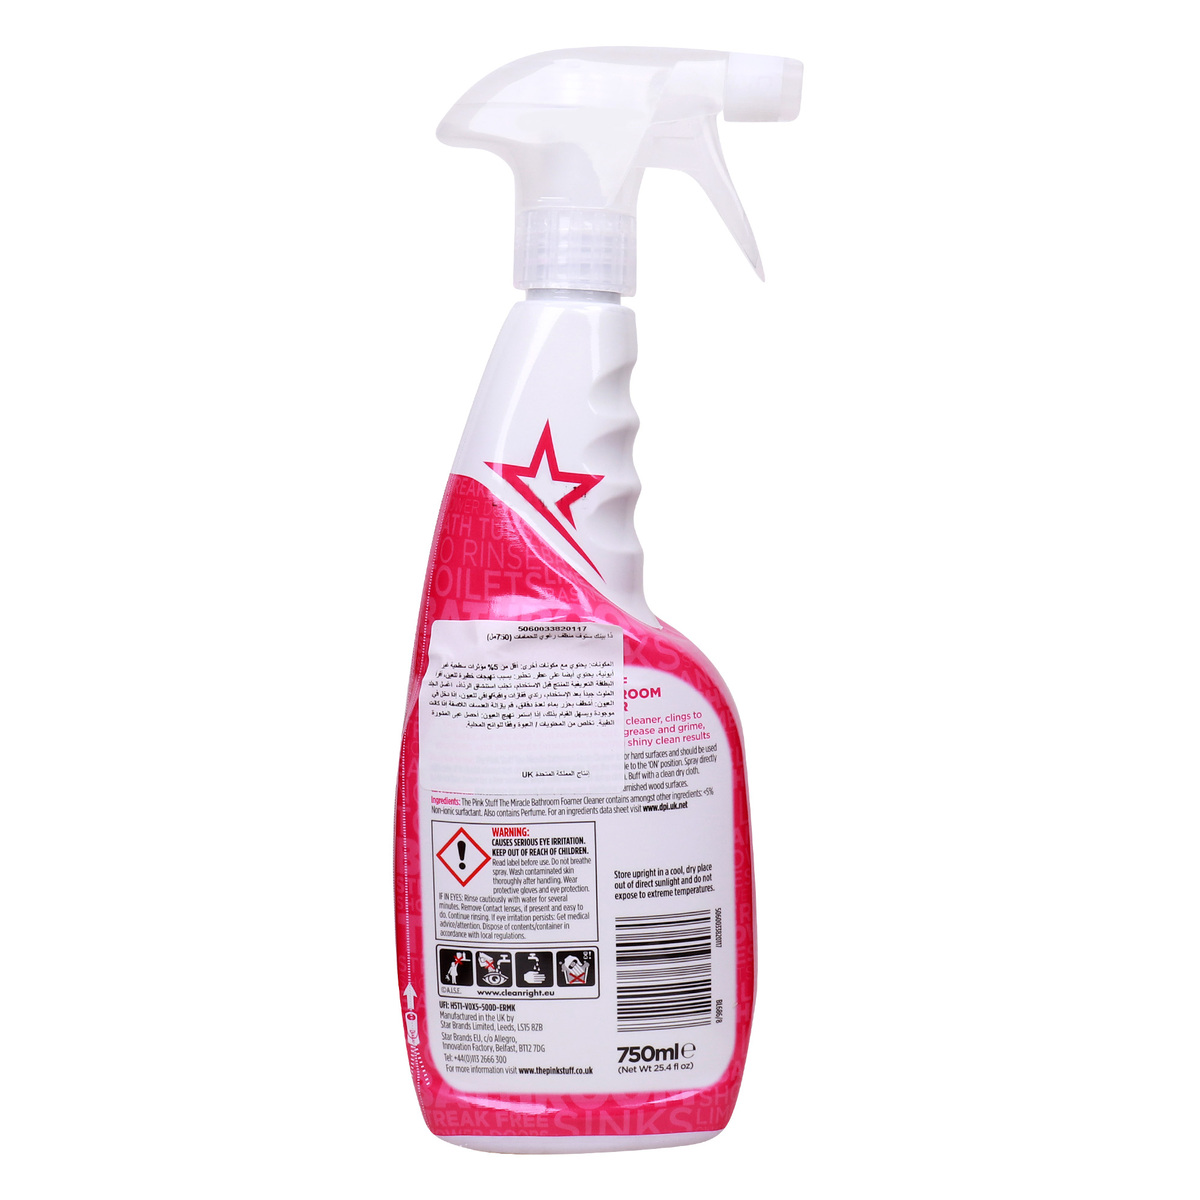  Stardrops The Pink Stuff Miracle Multi-Purpose Cleaning Spray  750 ML + Wash Cloth, 2 Piece Set : Health & Household